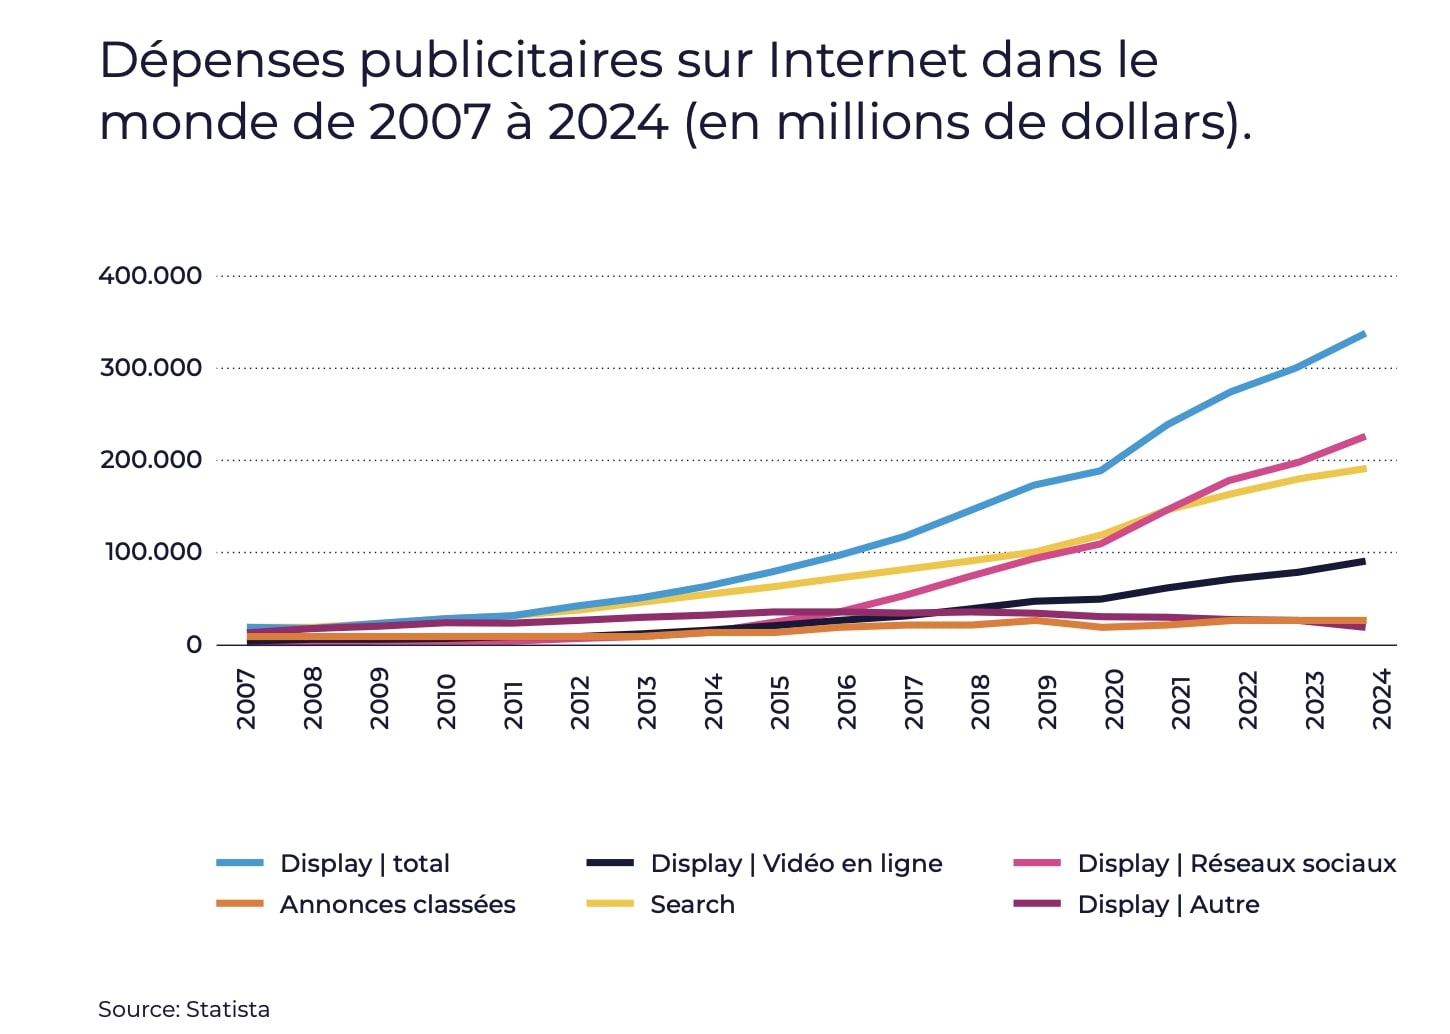 Internet advertising expenditures worldwide from 2007 to 2024 (in millions of dollars): Increase